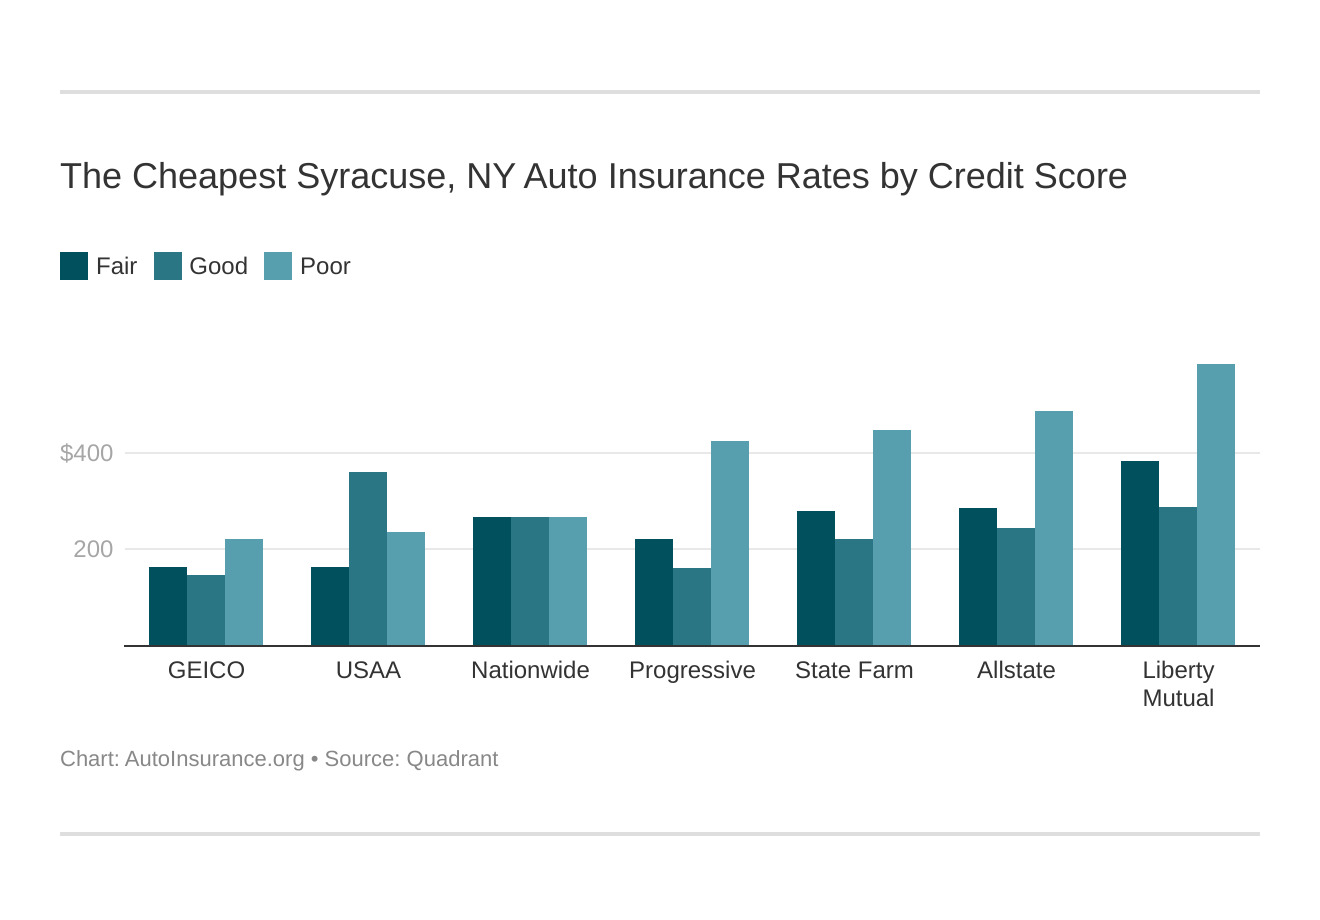 The Cheapest Syracuse, NY Auto Insurance Rates by Credit Score